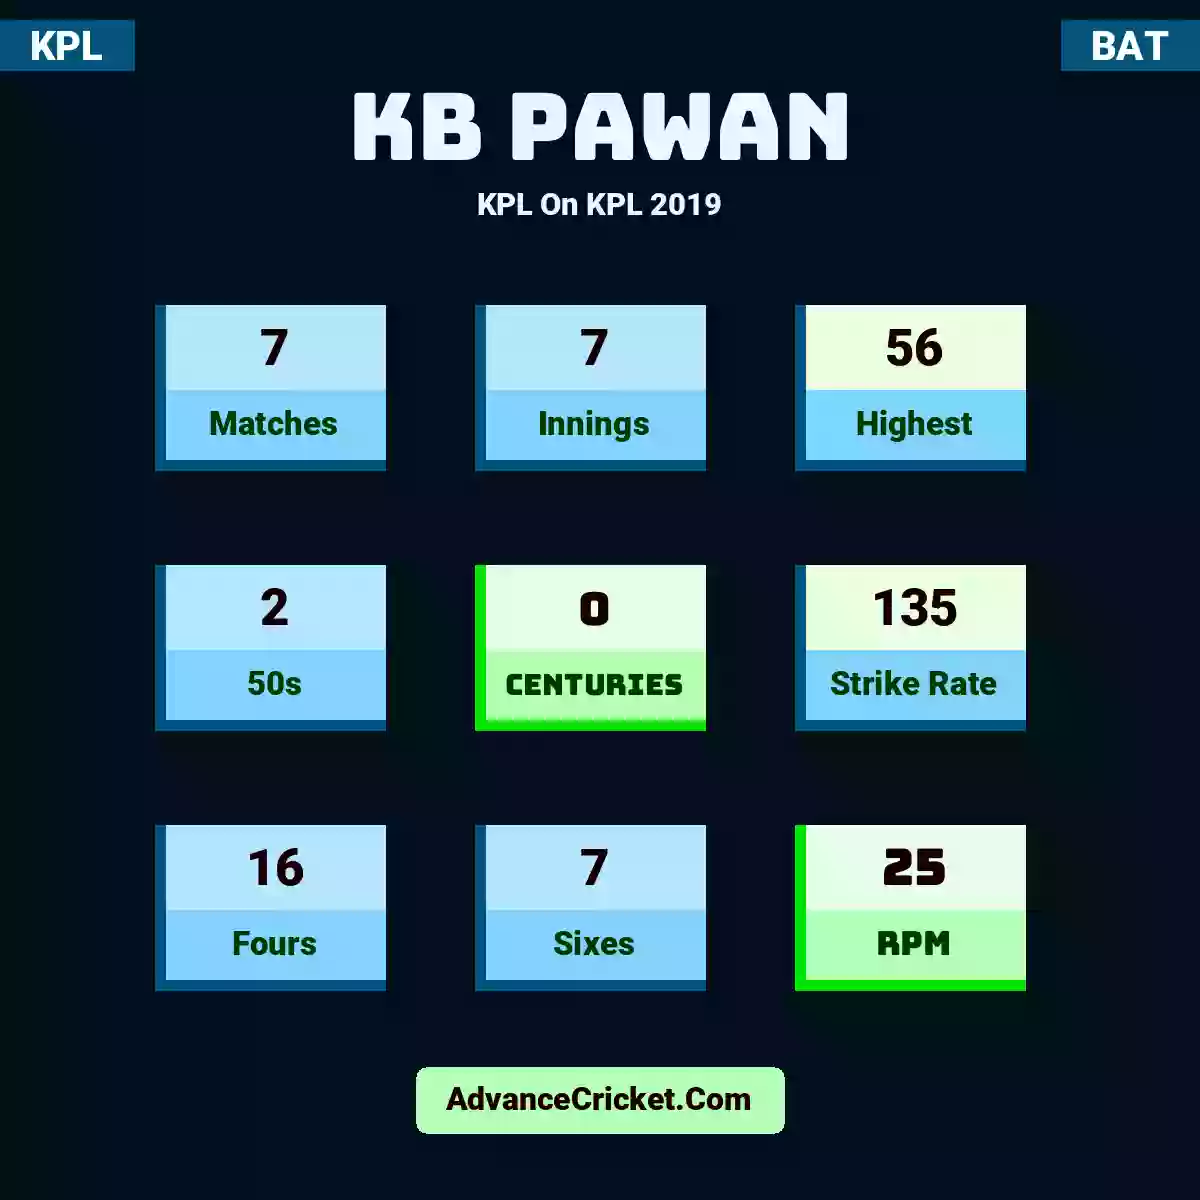 KB Pawan KPL  On KPL 2019, KB Pawan played 7 matches, scored 56 runs as highest, 2 half-centuries, and 0 centuries, with a strike rate of 135. K.Pawan hit 16 fours and 7 sixes, with an RPM of 25.